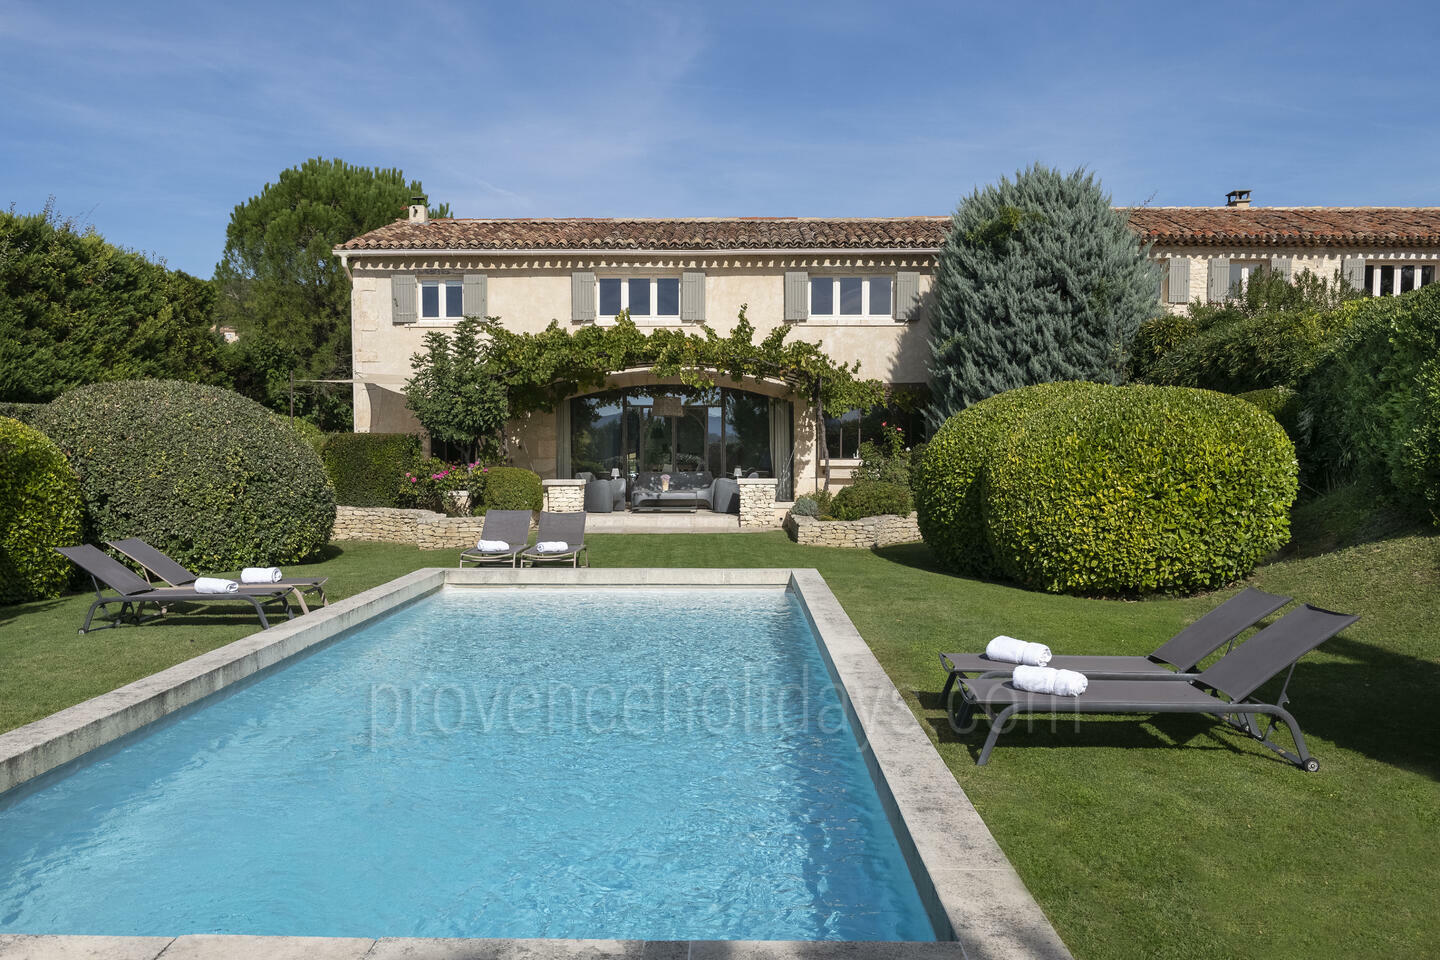 Charming Holiday Rental with Private Pool in Luberon 1 - Bastide de Joucas: Villa: Pool